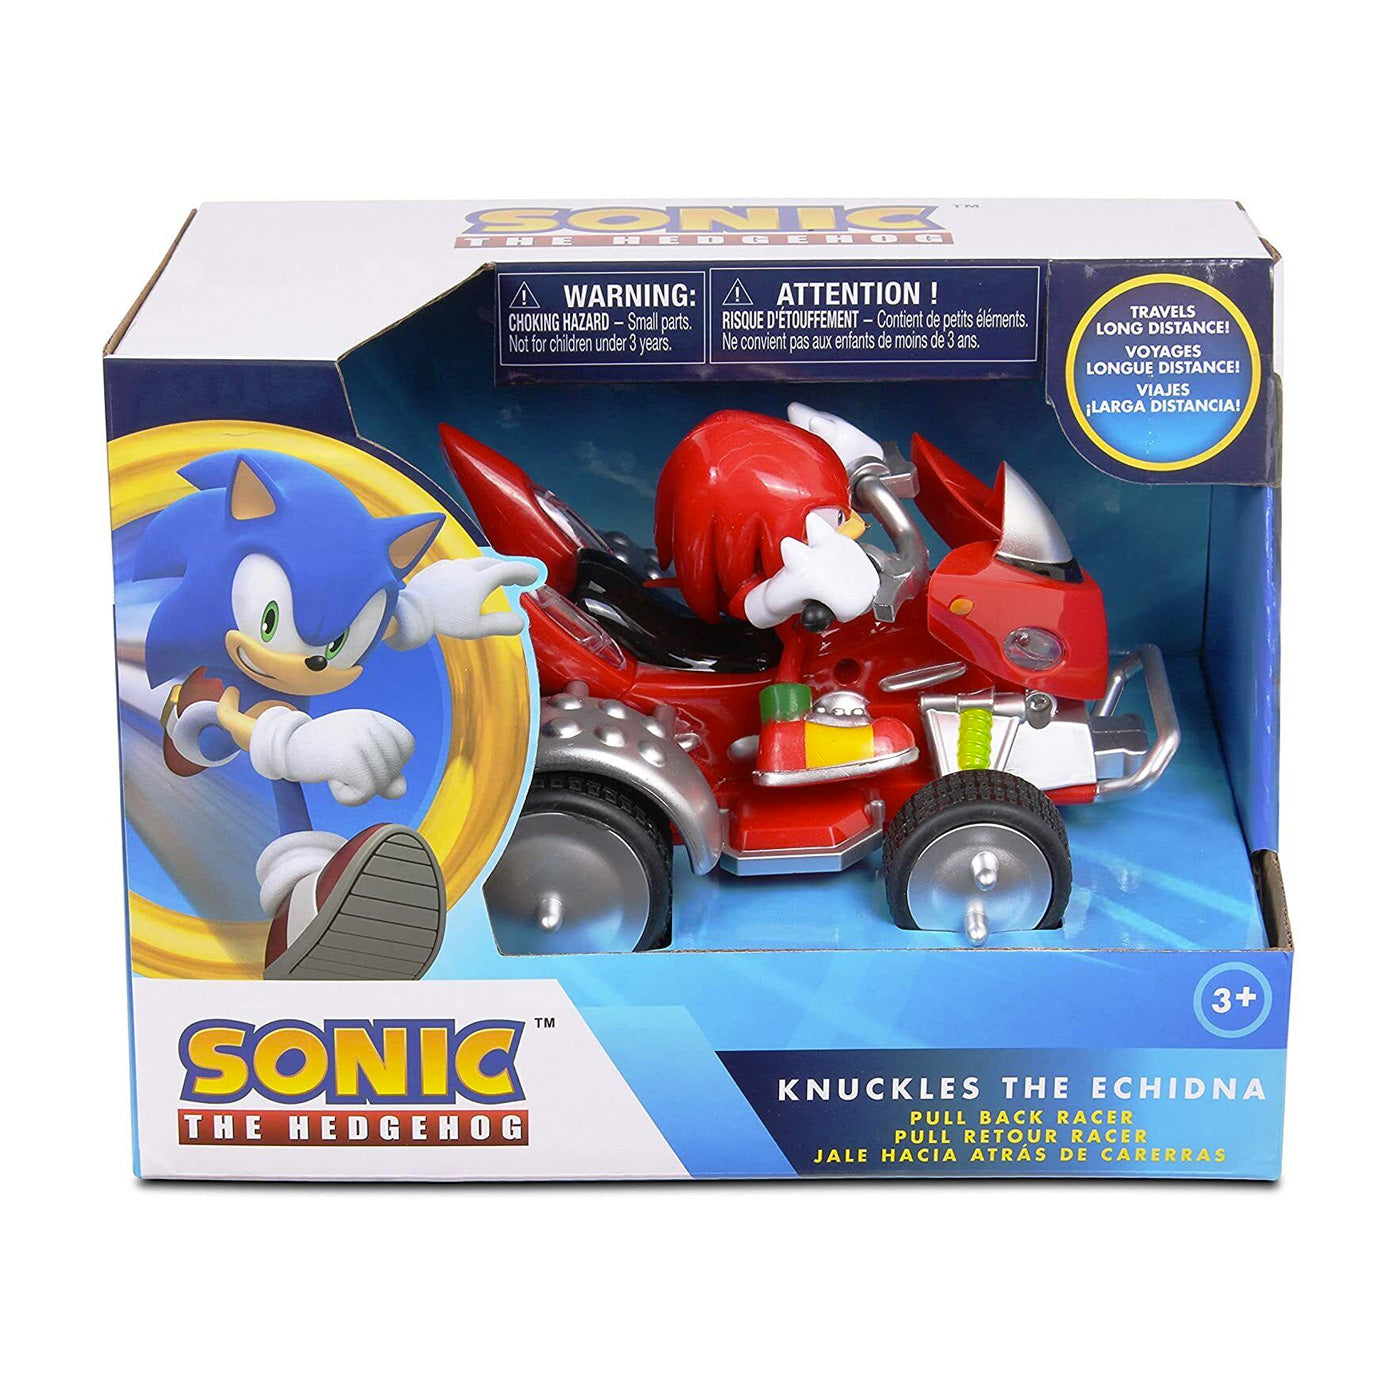 Sonic The Hedgehog: Knuckles